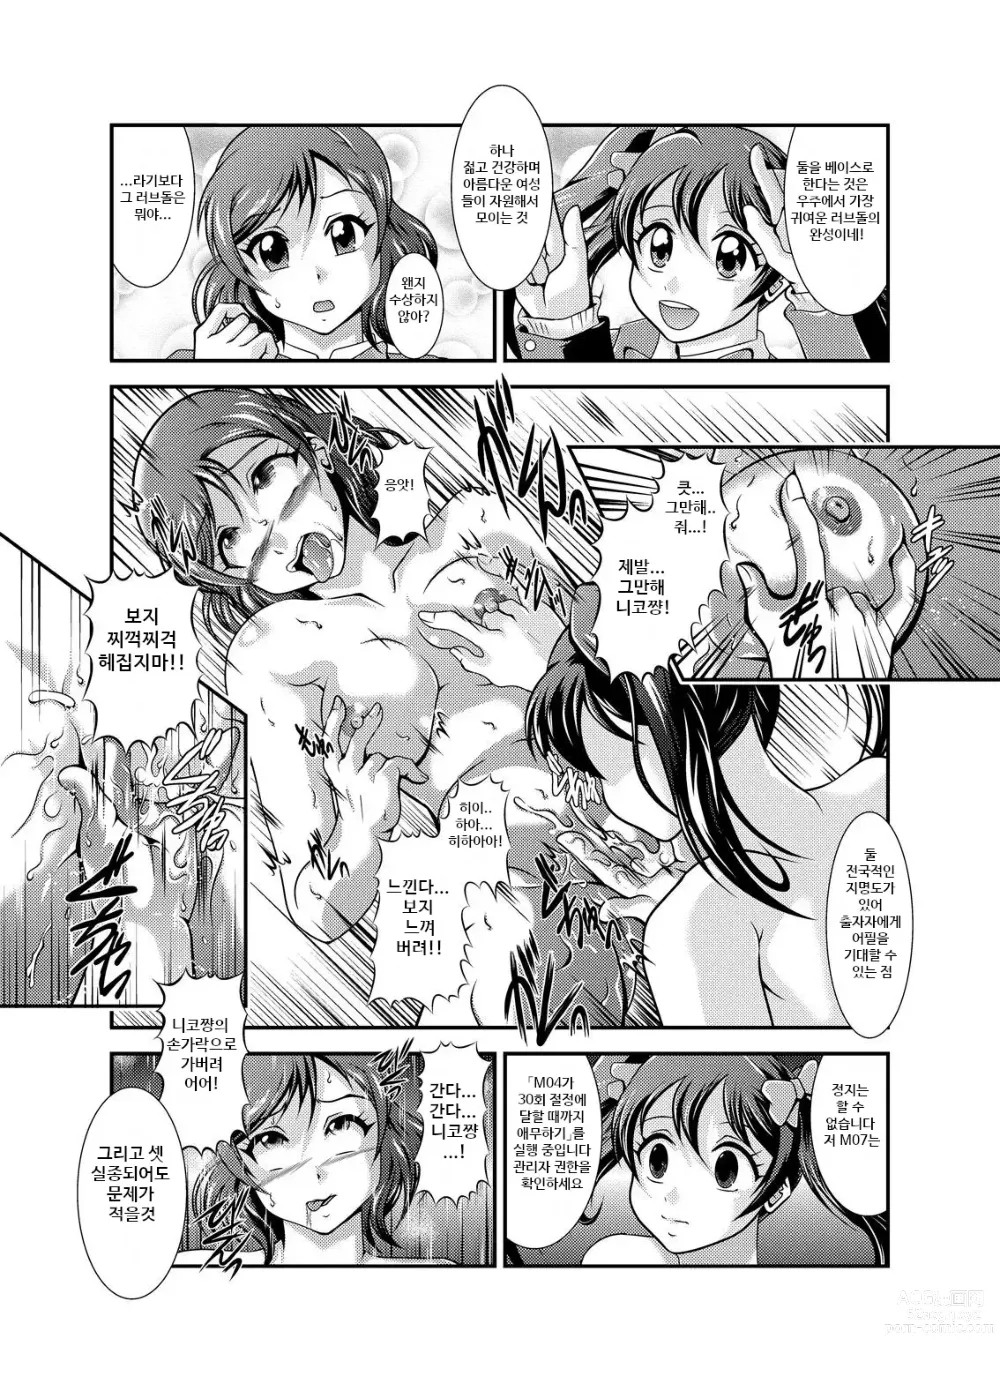 Page 78 of doujinshi ProjectAqours EP01-04